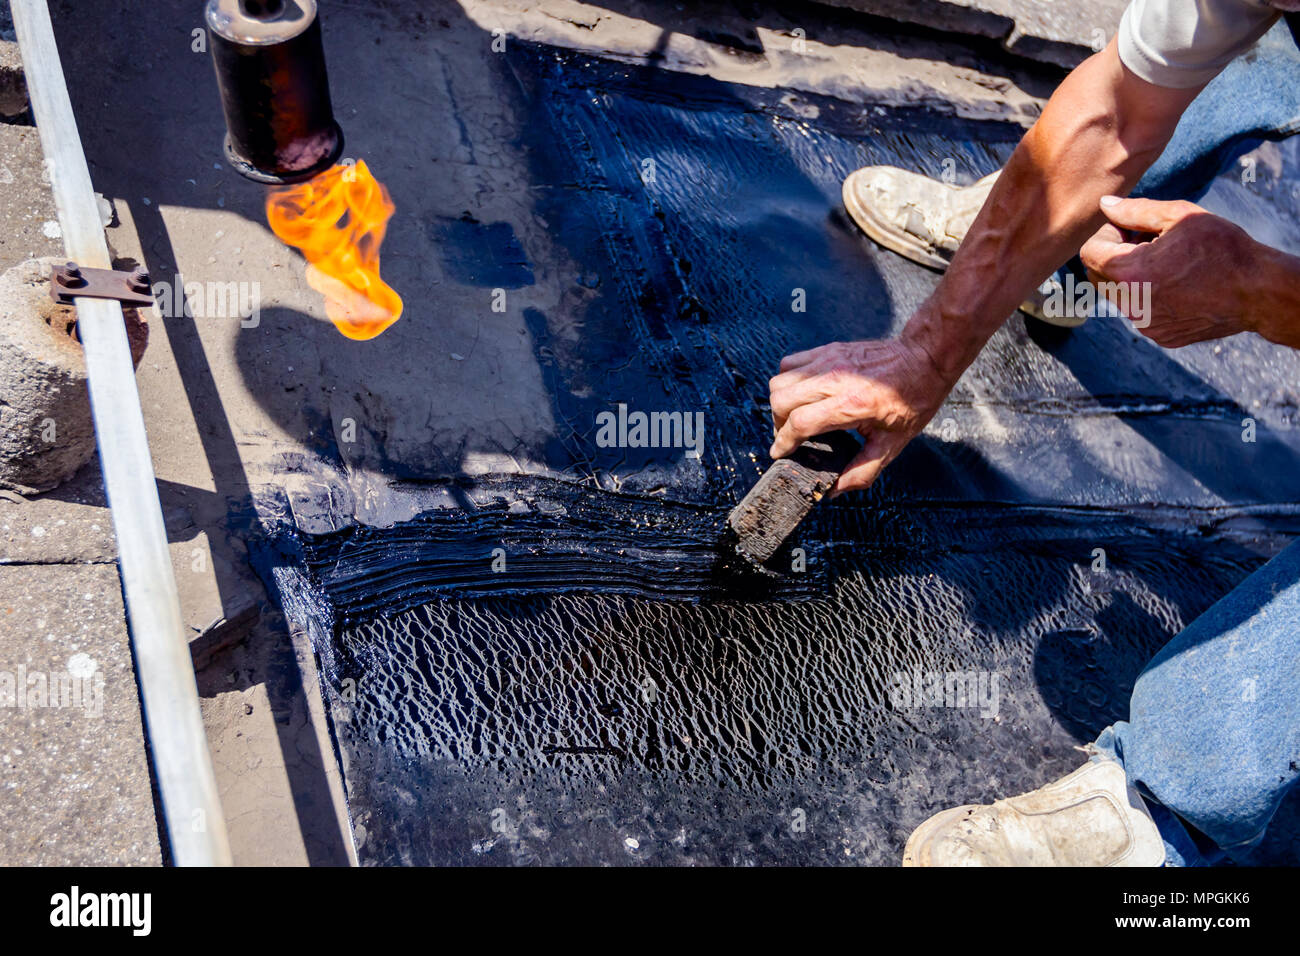 Heating and melting of bitumen surface by flame from gas torch. Worker  adjusts bituminous cover for roofing felt, smears melted resin with wooden  tool Stock Photo - Alamy